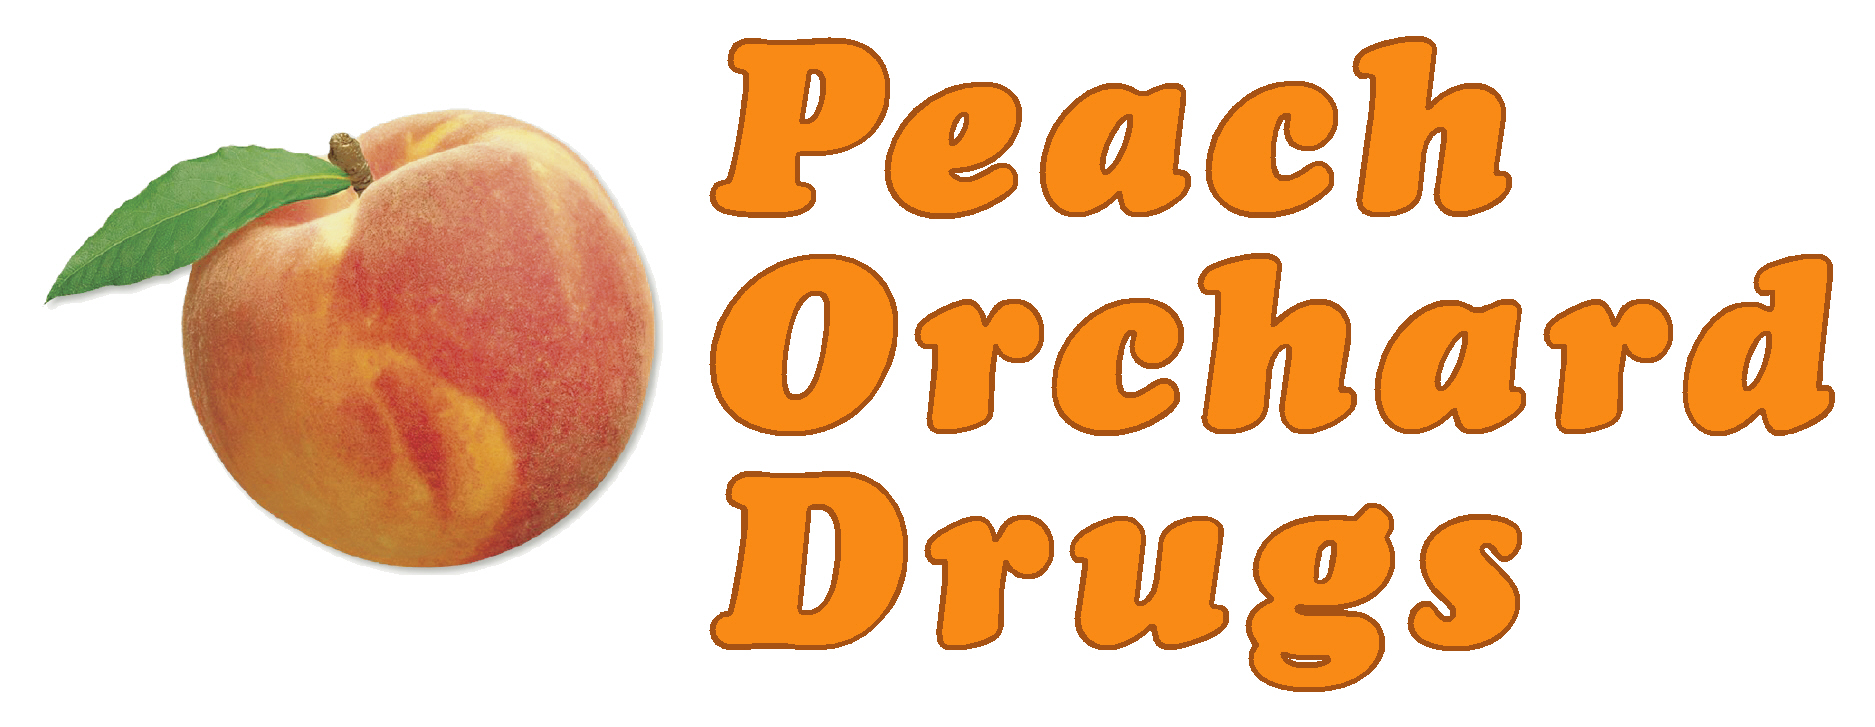 Peach Orchard Drugs